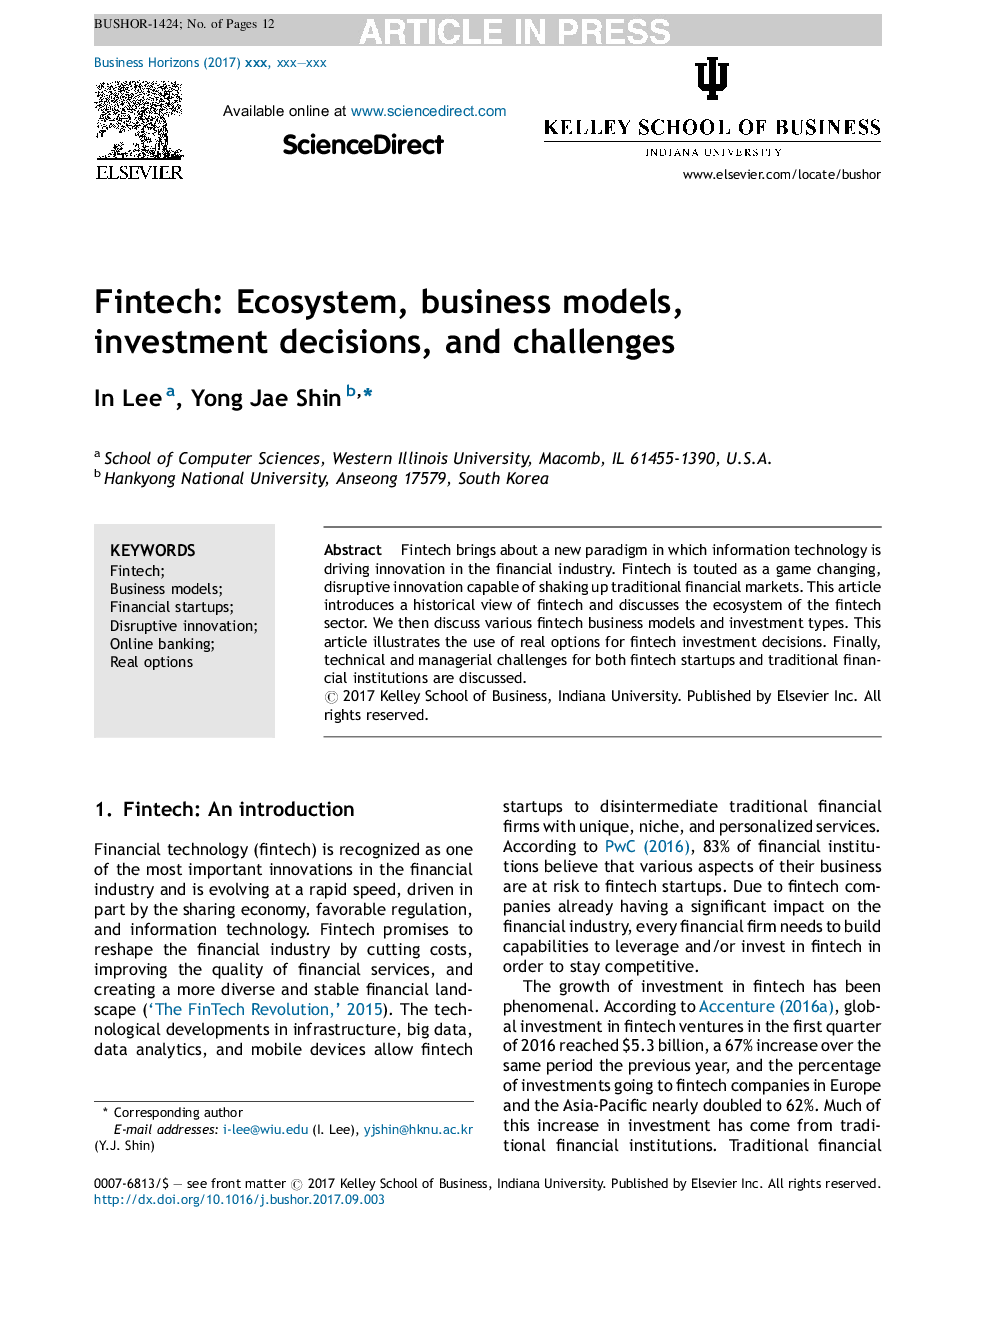 Fintech: Ecosystem, business models, investment decisions, and challenges